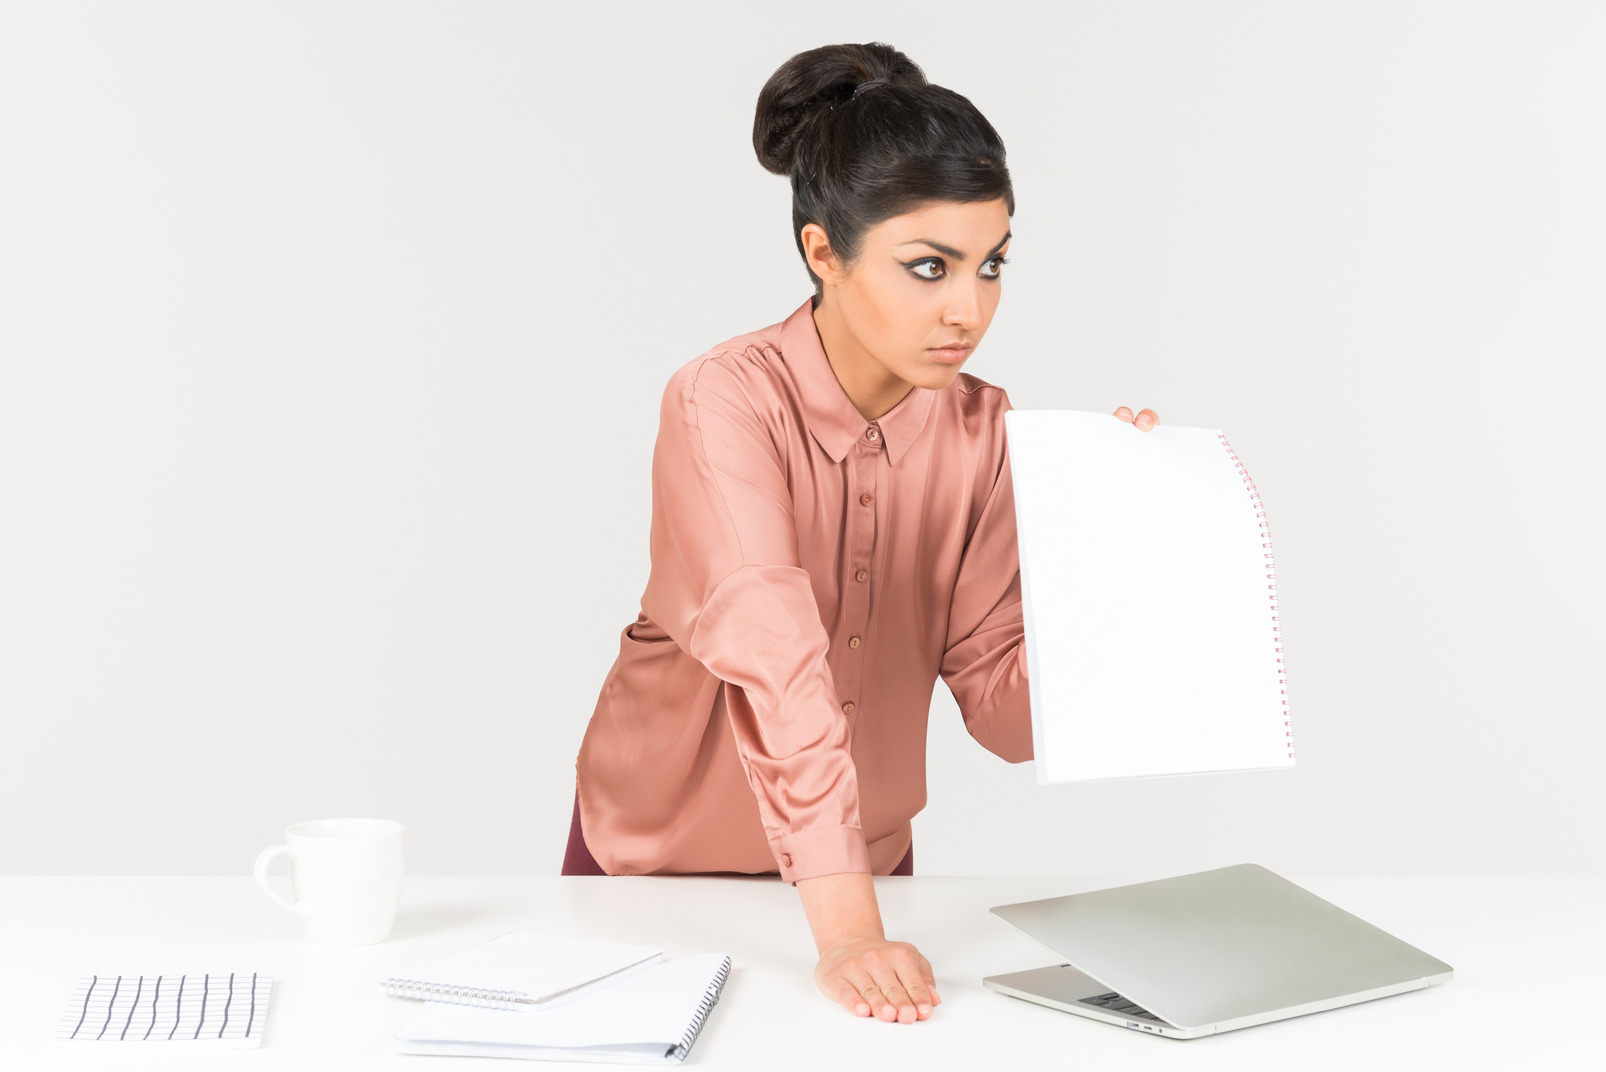 Displeased young indian office worker standing at the office desk and showing paper